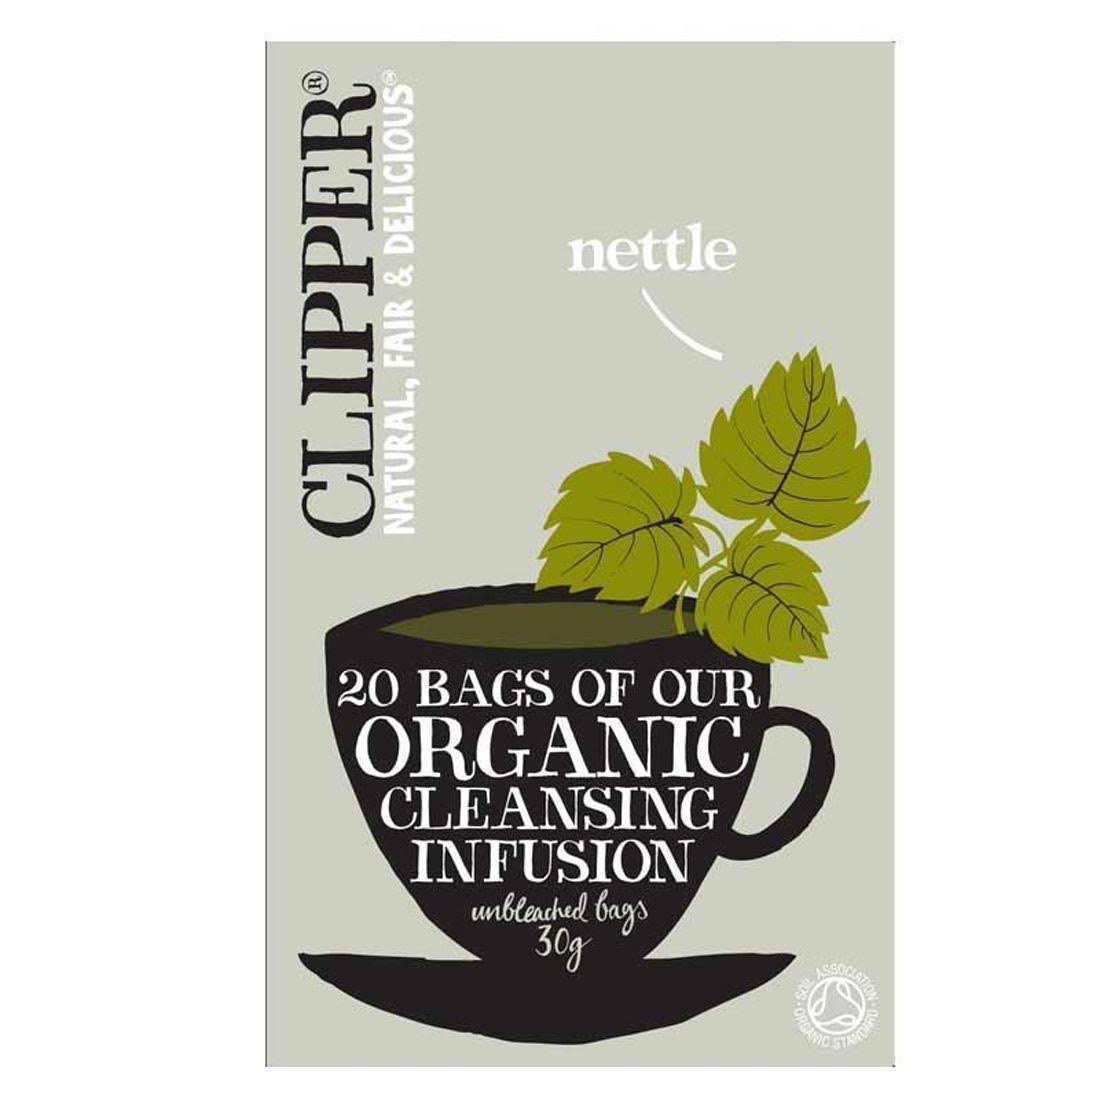 Clipper Organic Nettle Infusion Unbleached Bags - 20ct, 30g